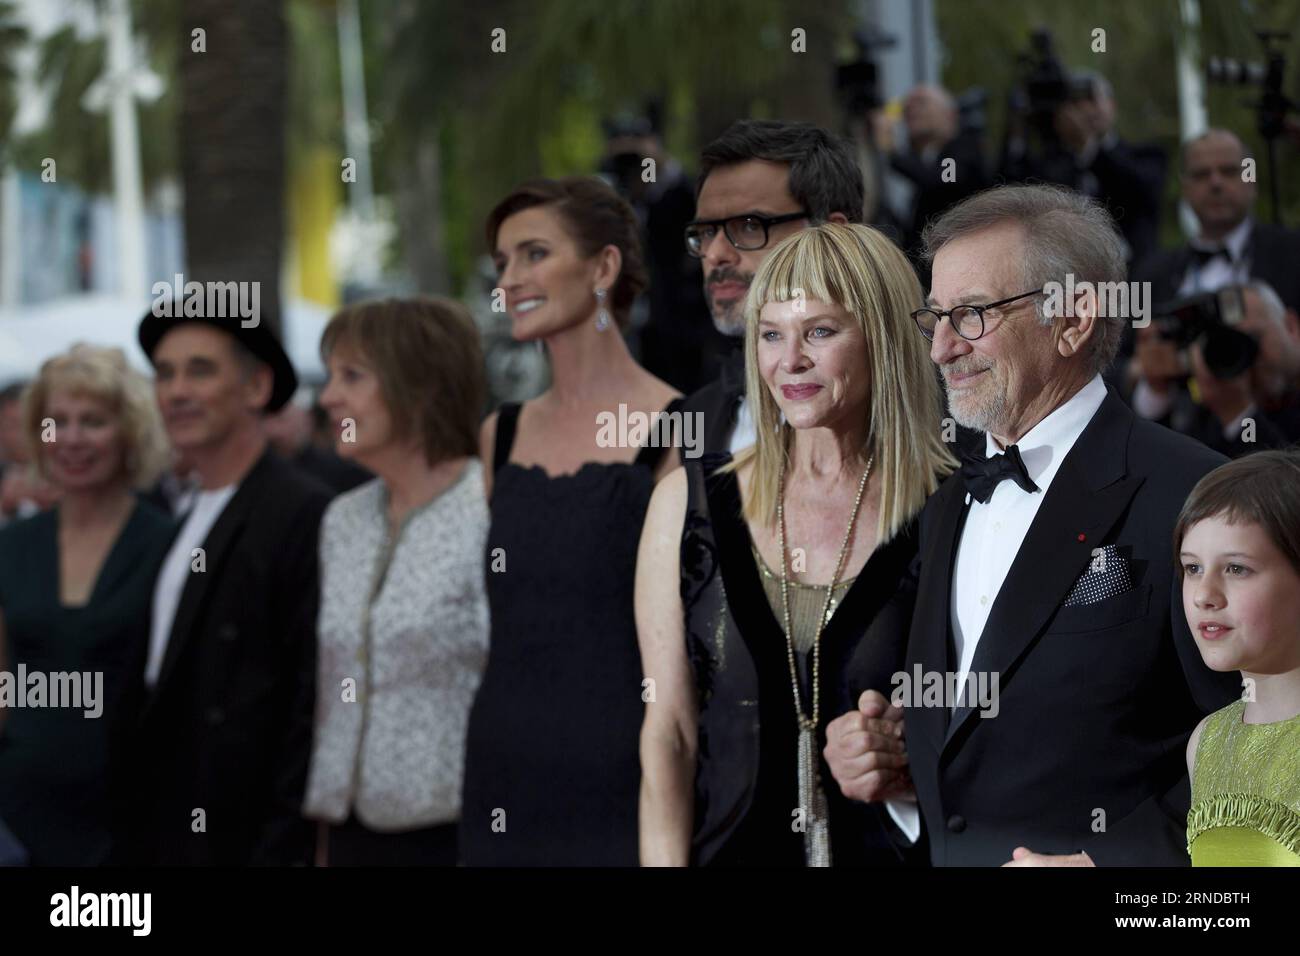 (160515) -- CANNES, May 14, 2016 -- Director Steven Spielberg (2nd R), his wife Kate Capshaw (3rd R) and cast member Ruby Barnhill (1st R) pose on the red carpet as they arrive for the screening of the film The BFG at the 69th Cannes Film Festival in Cannes, France, May 14, 2016.) FRANCE-CANNES-FILM FESTIVAL-THE BFG-RED CARPET JinxYu PUBLICATIONxNOTxINxCHN   160515 Cannes May 14 2016 Director Steven Spielberg 2nd r His wife Kate Capshaw 3rd r and Cast member Ruby Barnhill 1st r Pose ON The Red Carpet As They Arrive for The Screening of The Film The BfG AT The 69th Cannes Film Festival in Canne Stock Photo